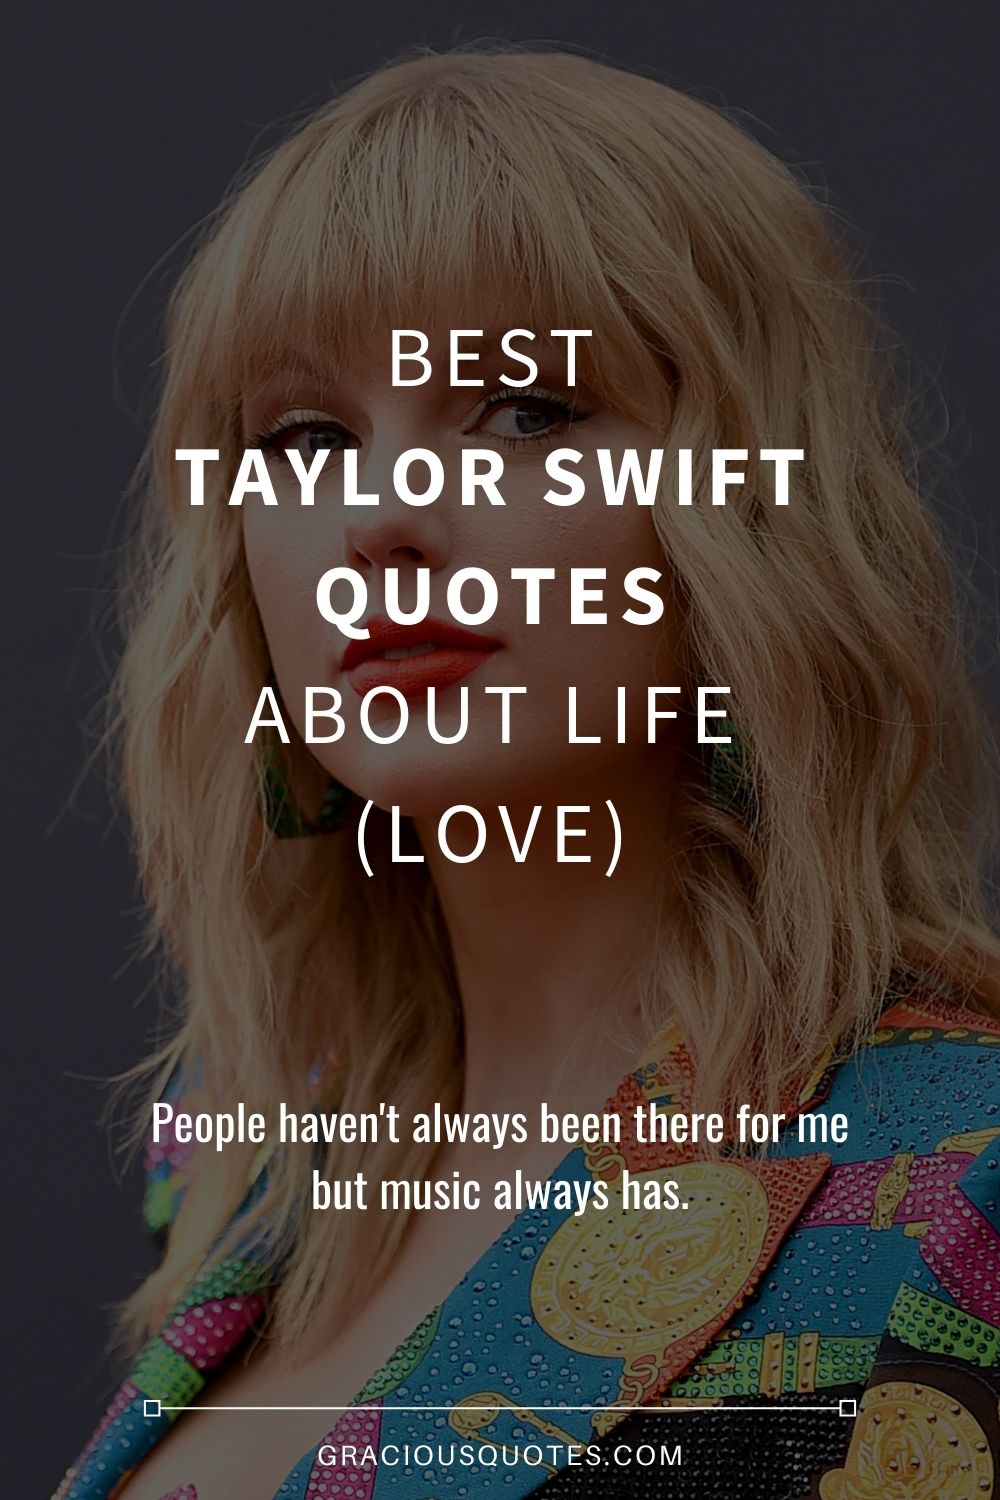 Best Taylor Swift Quotes About Life (LOVE) - Gracious Quotes